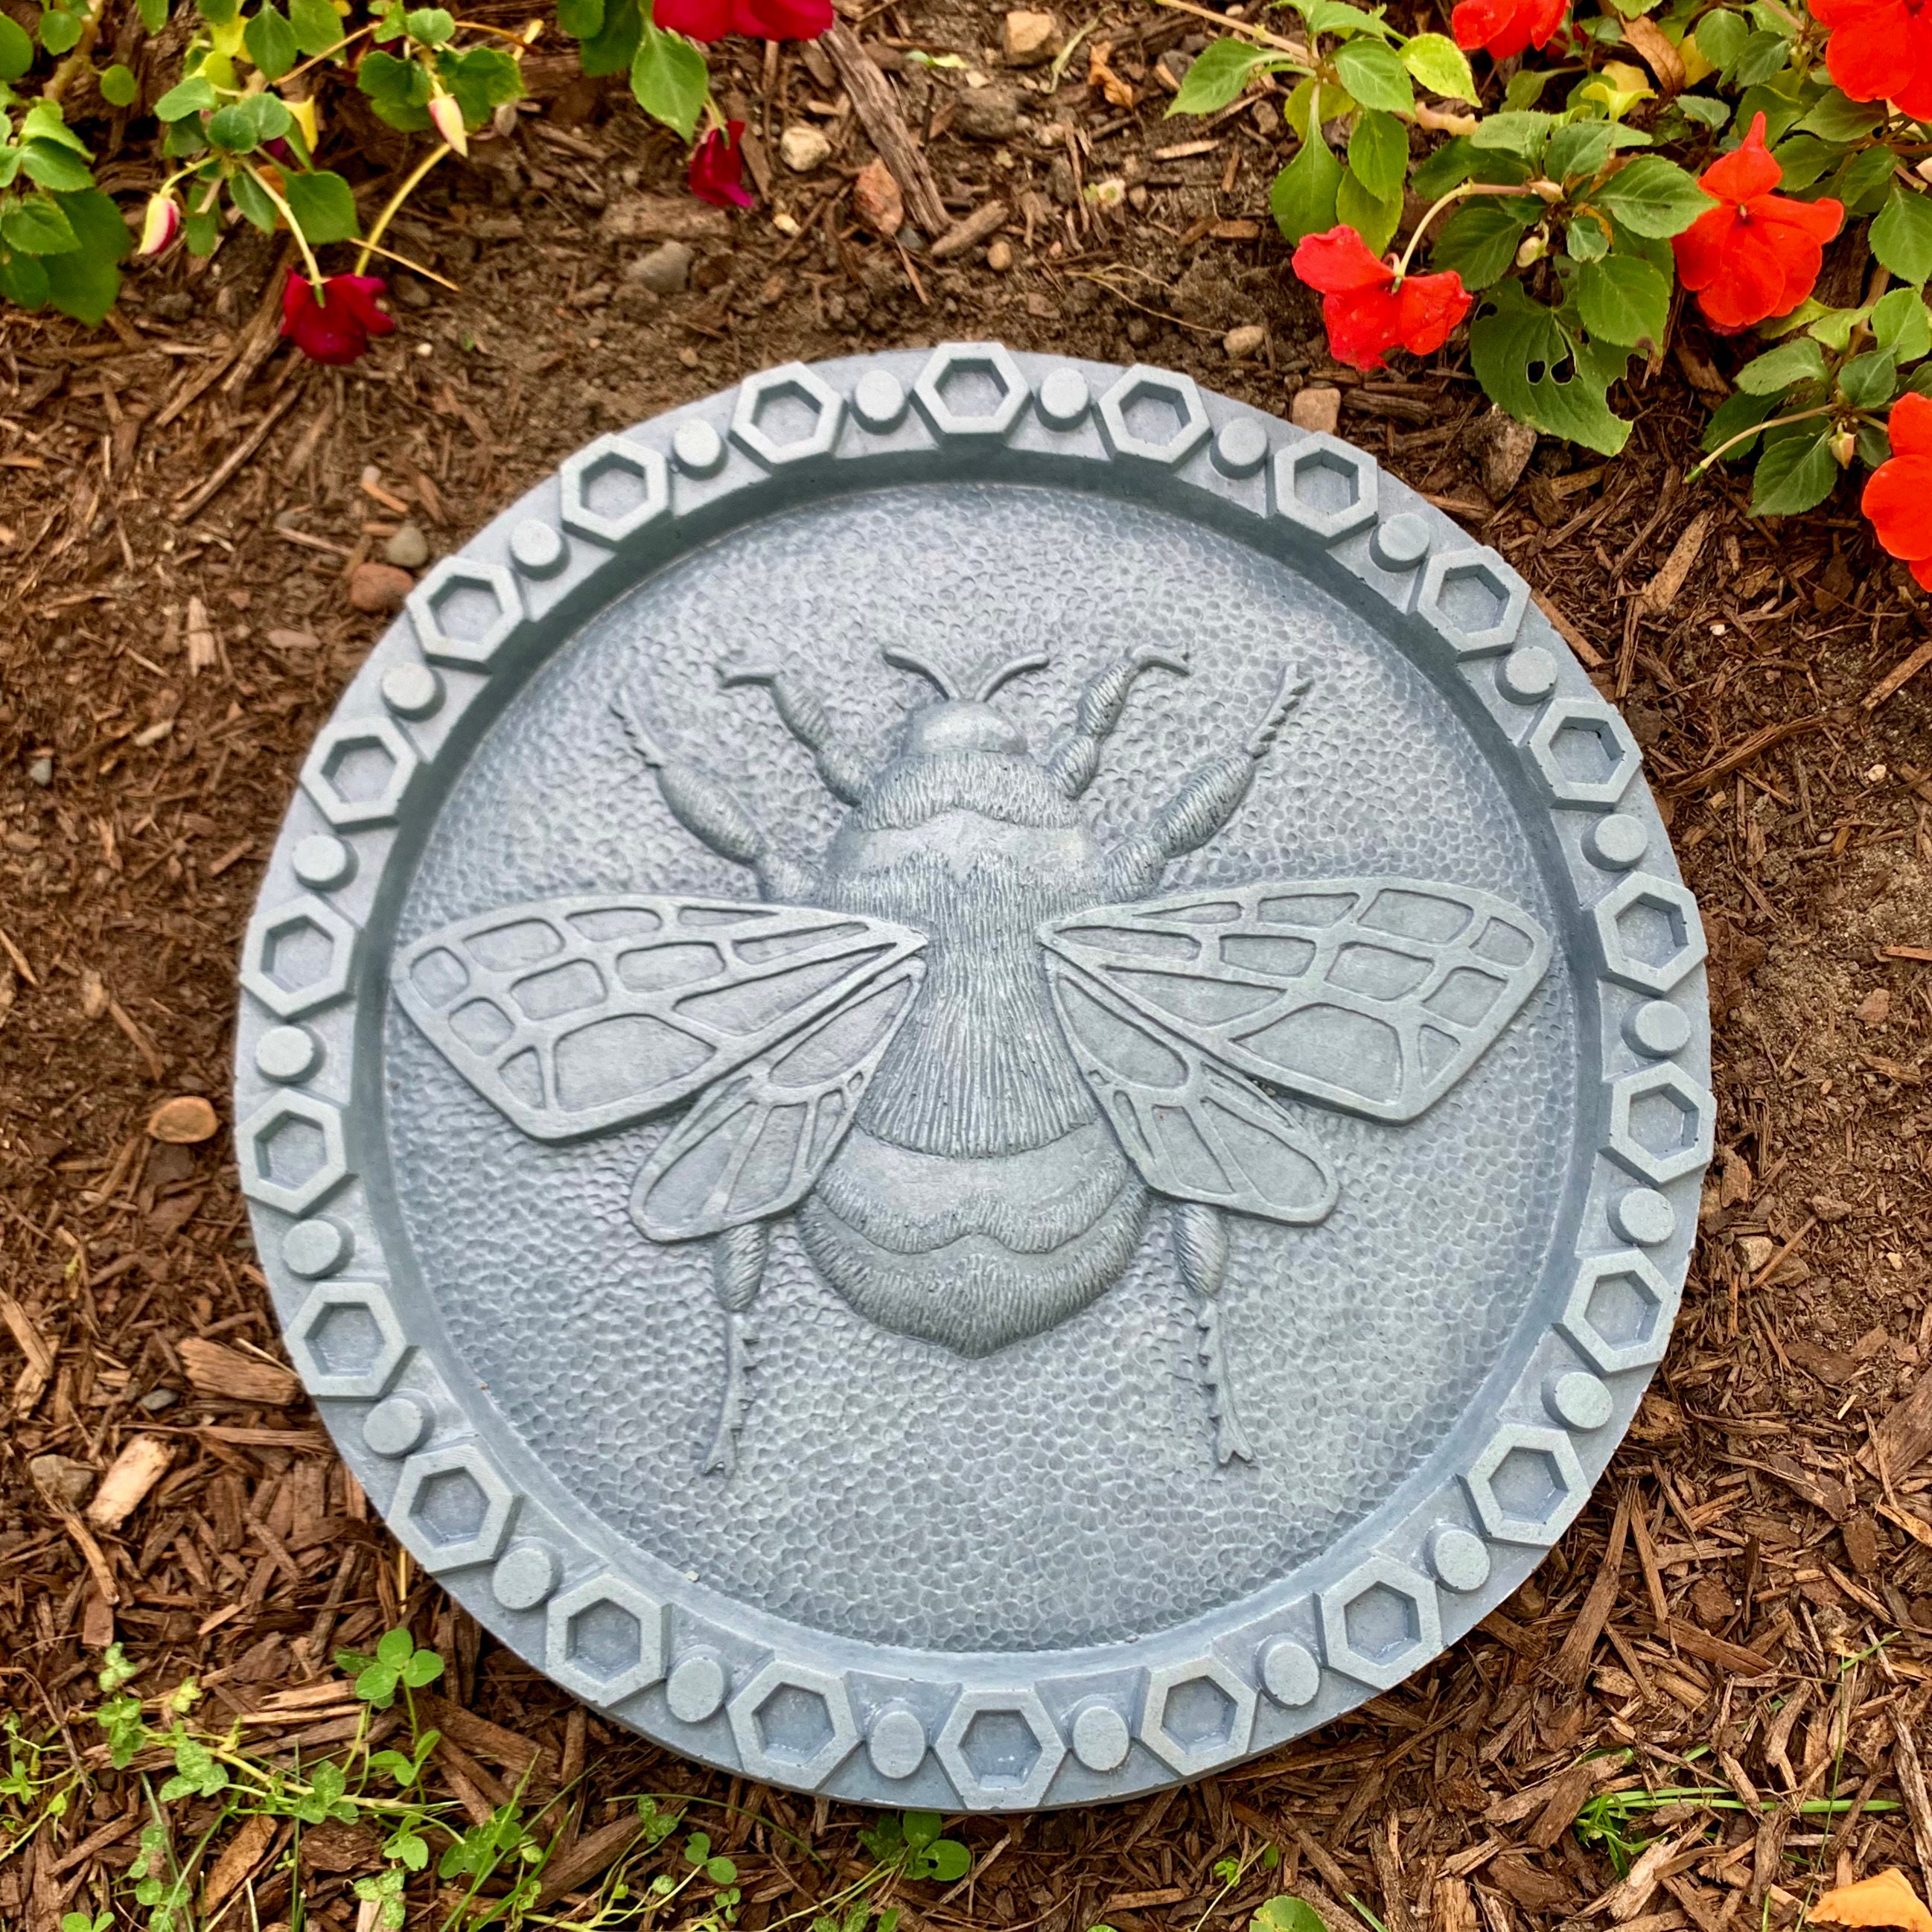 Cast Concrete Bumble Bee Stepping Stone bluestone and Garden Sculpture 